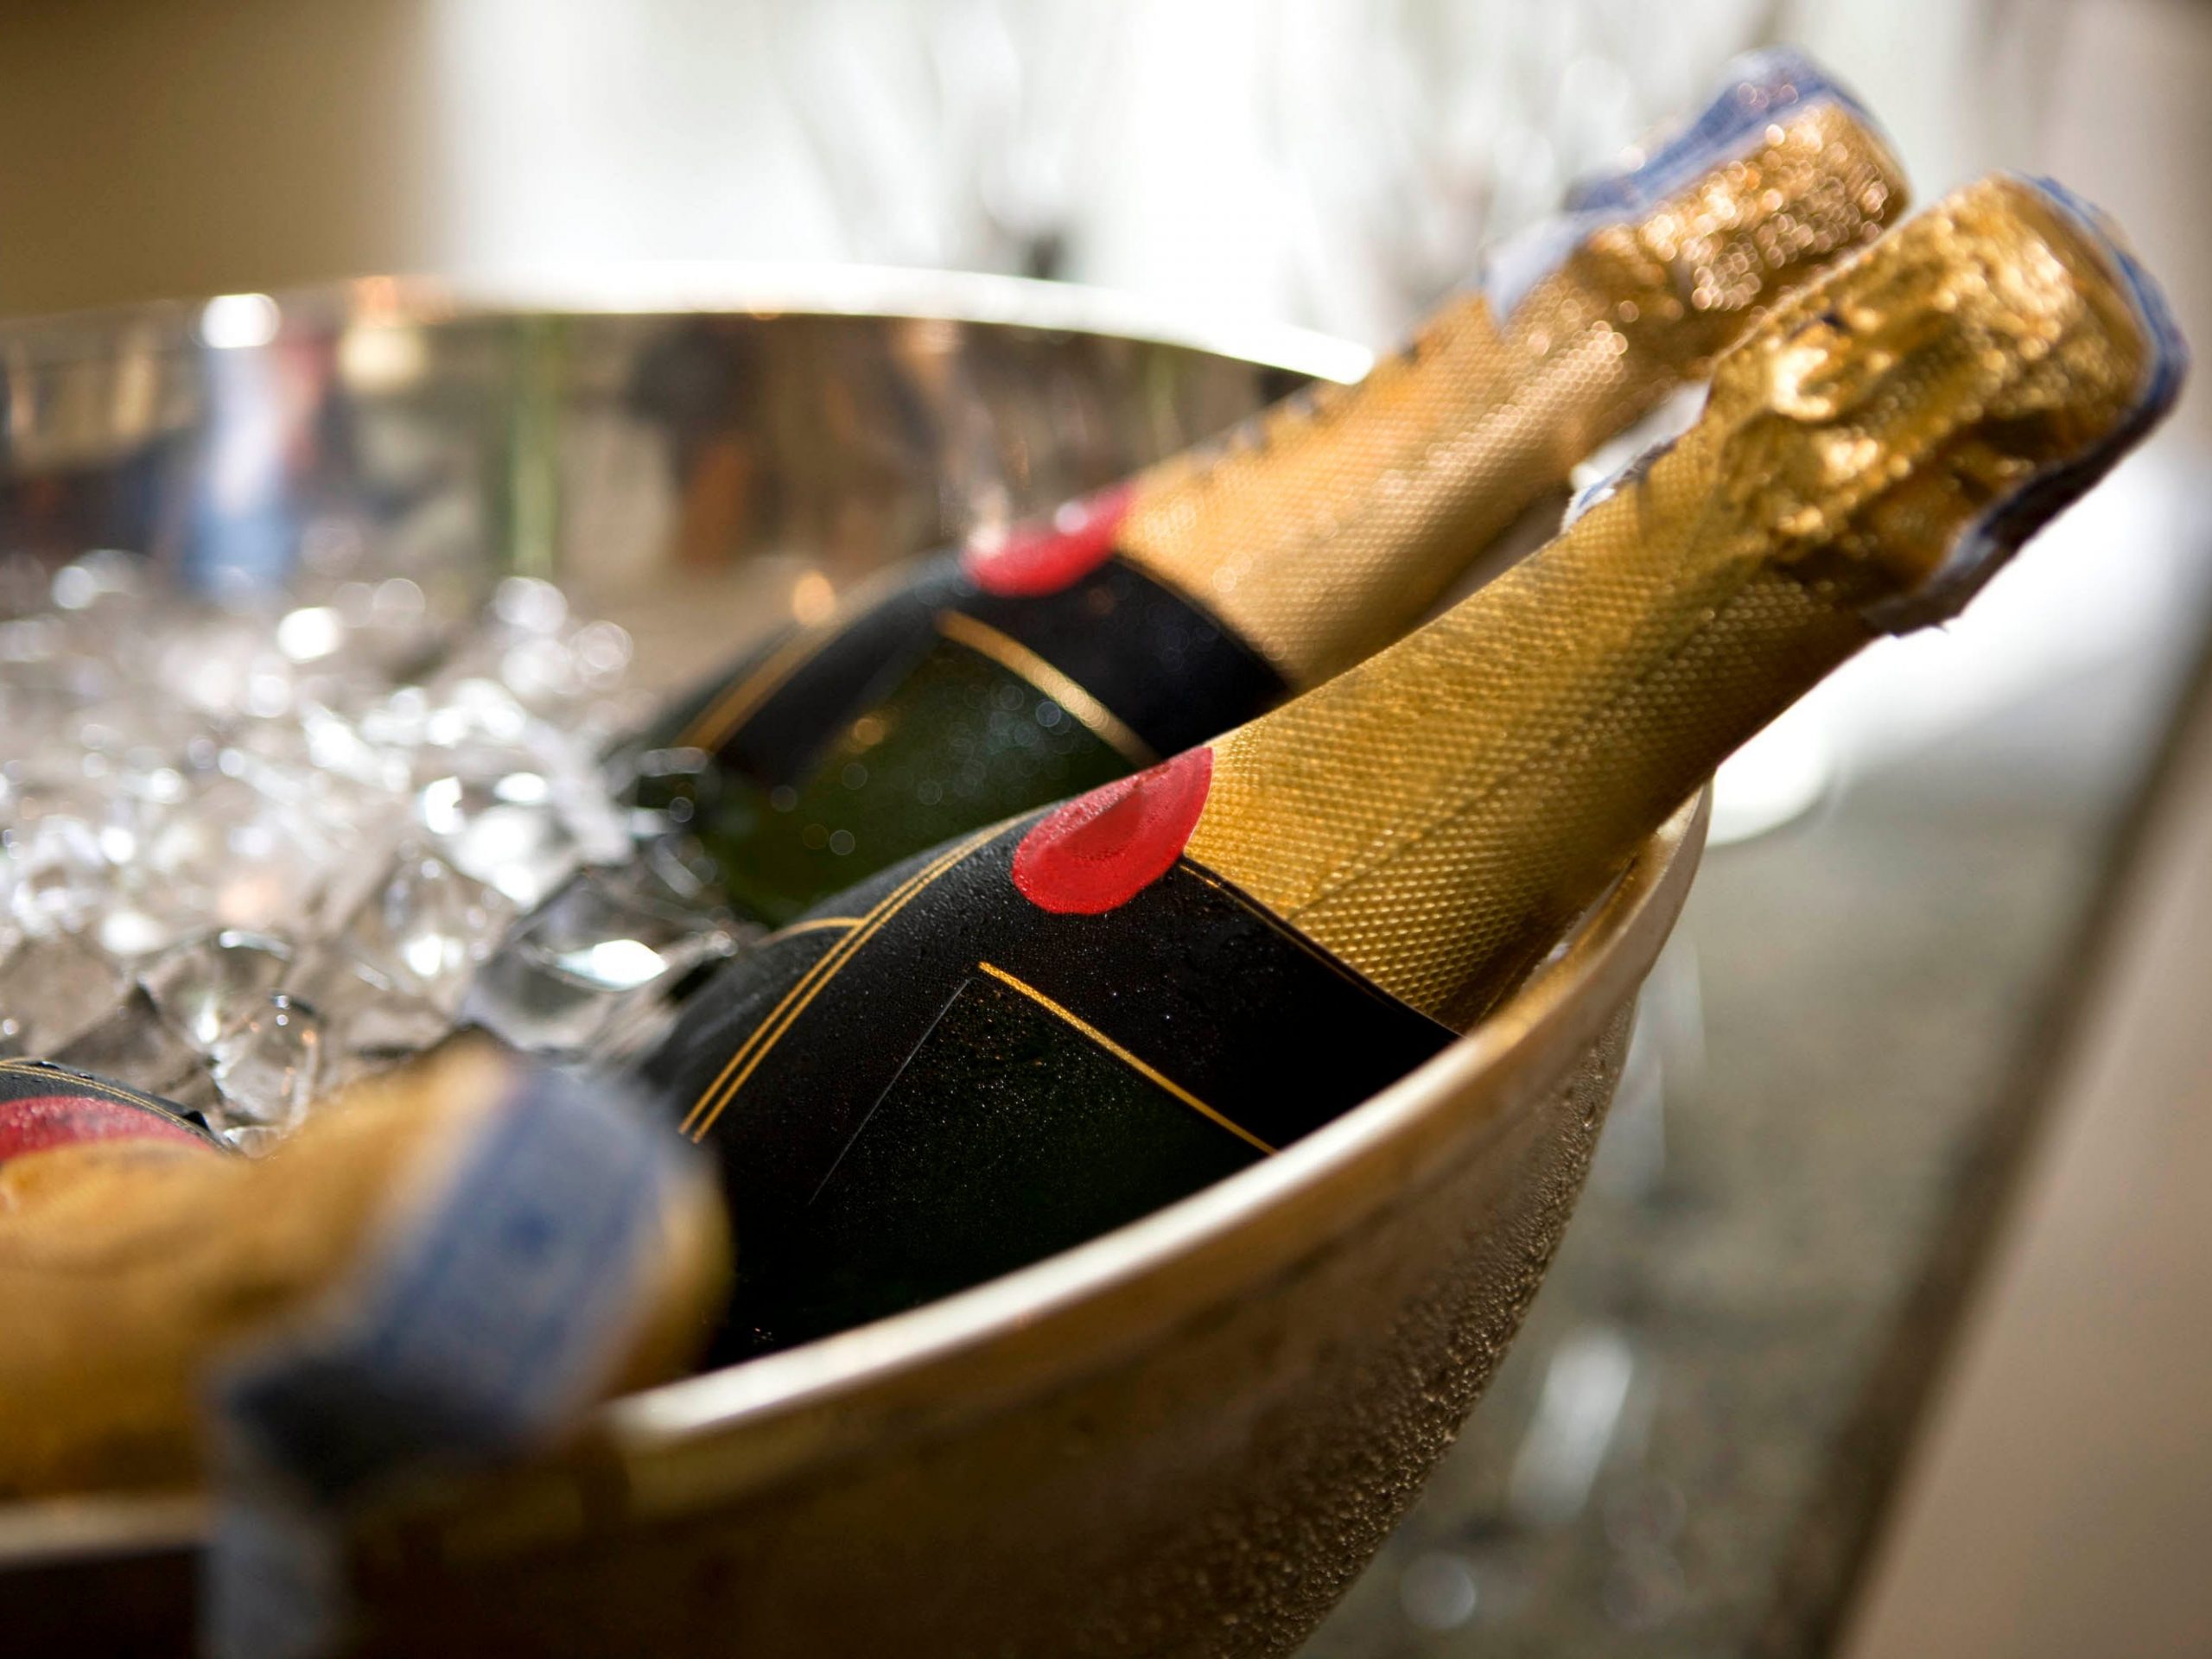 Three bottles of unopened Champagne sitting in a large bowl of ice